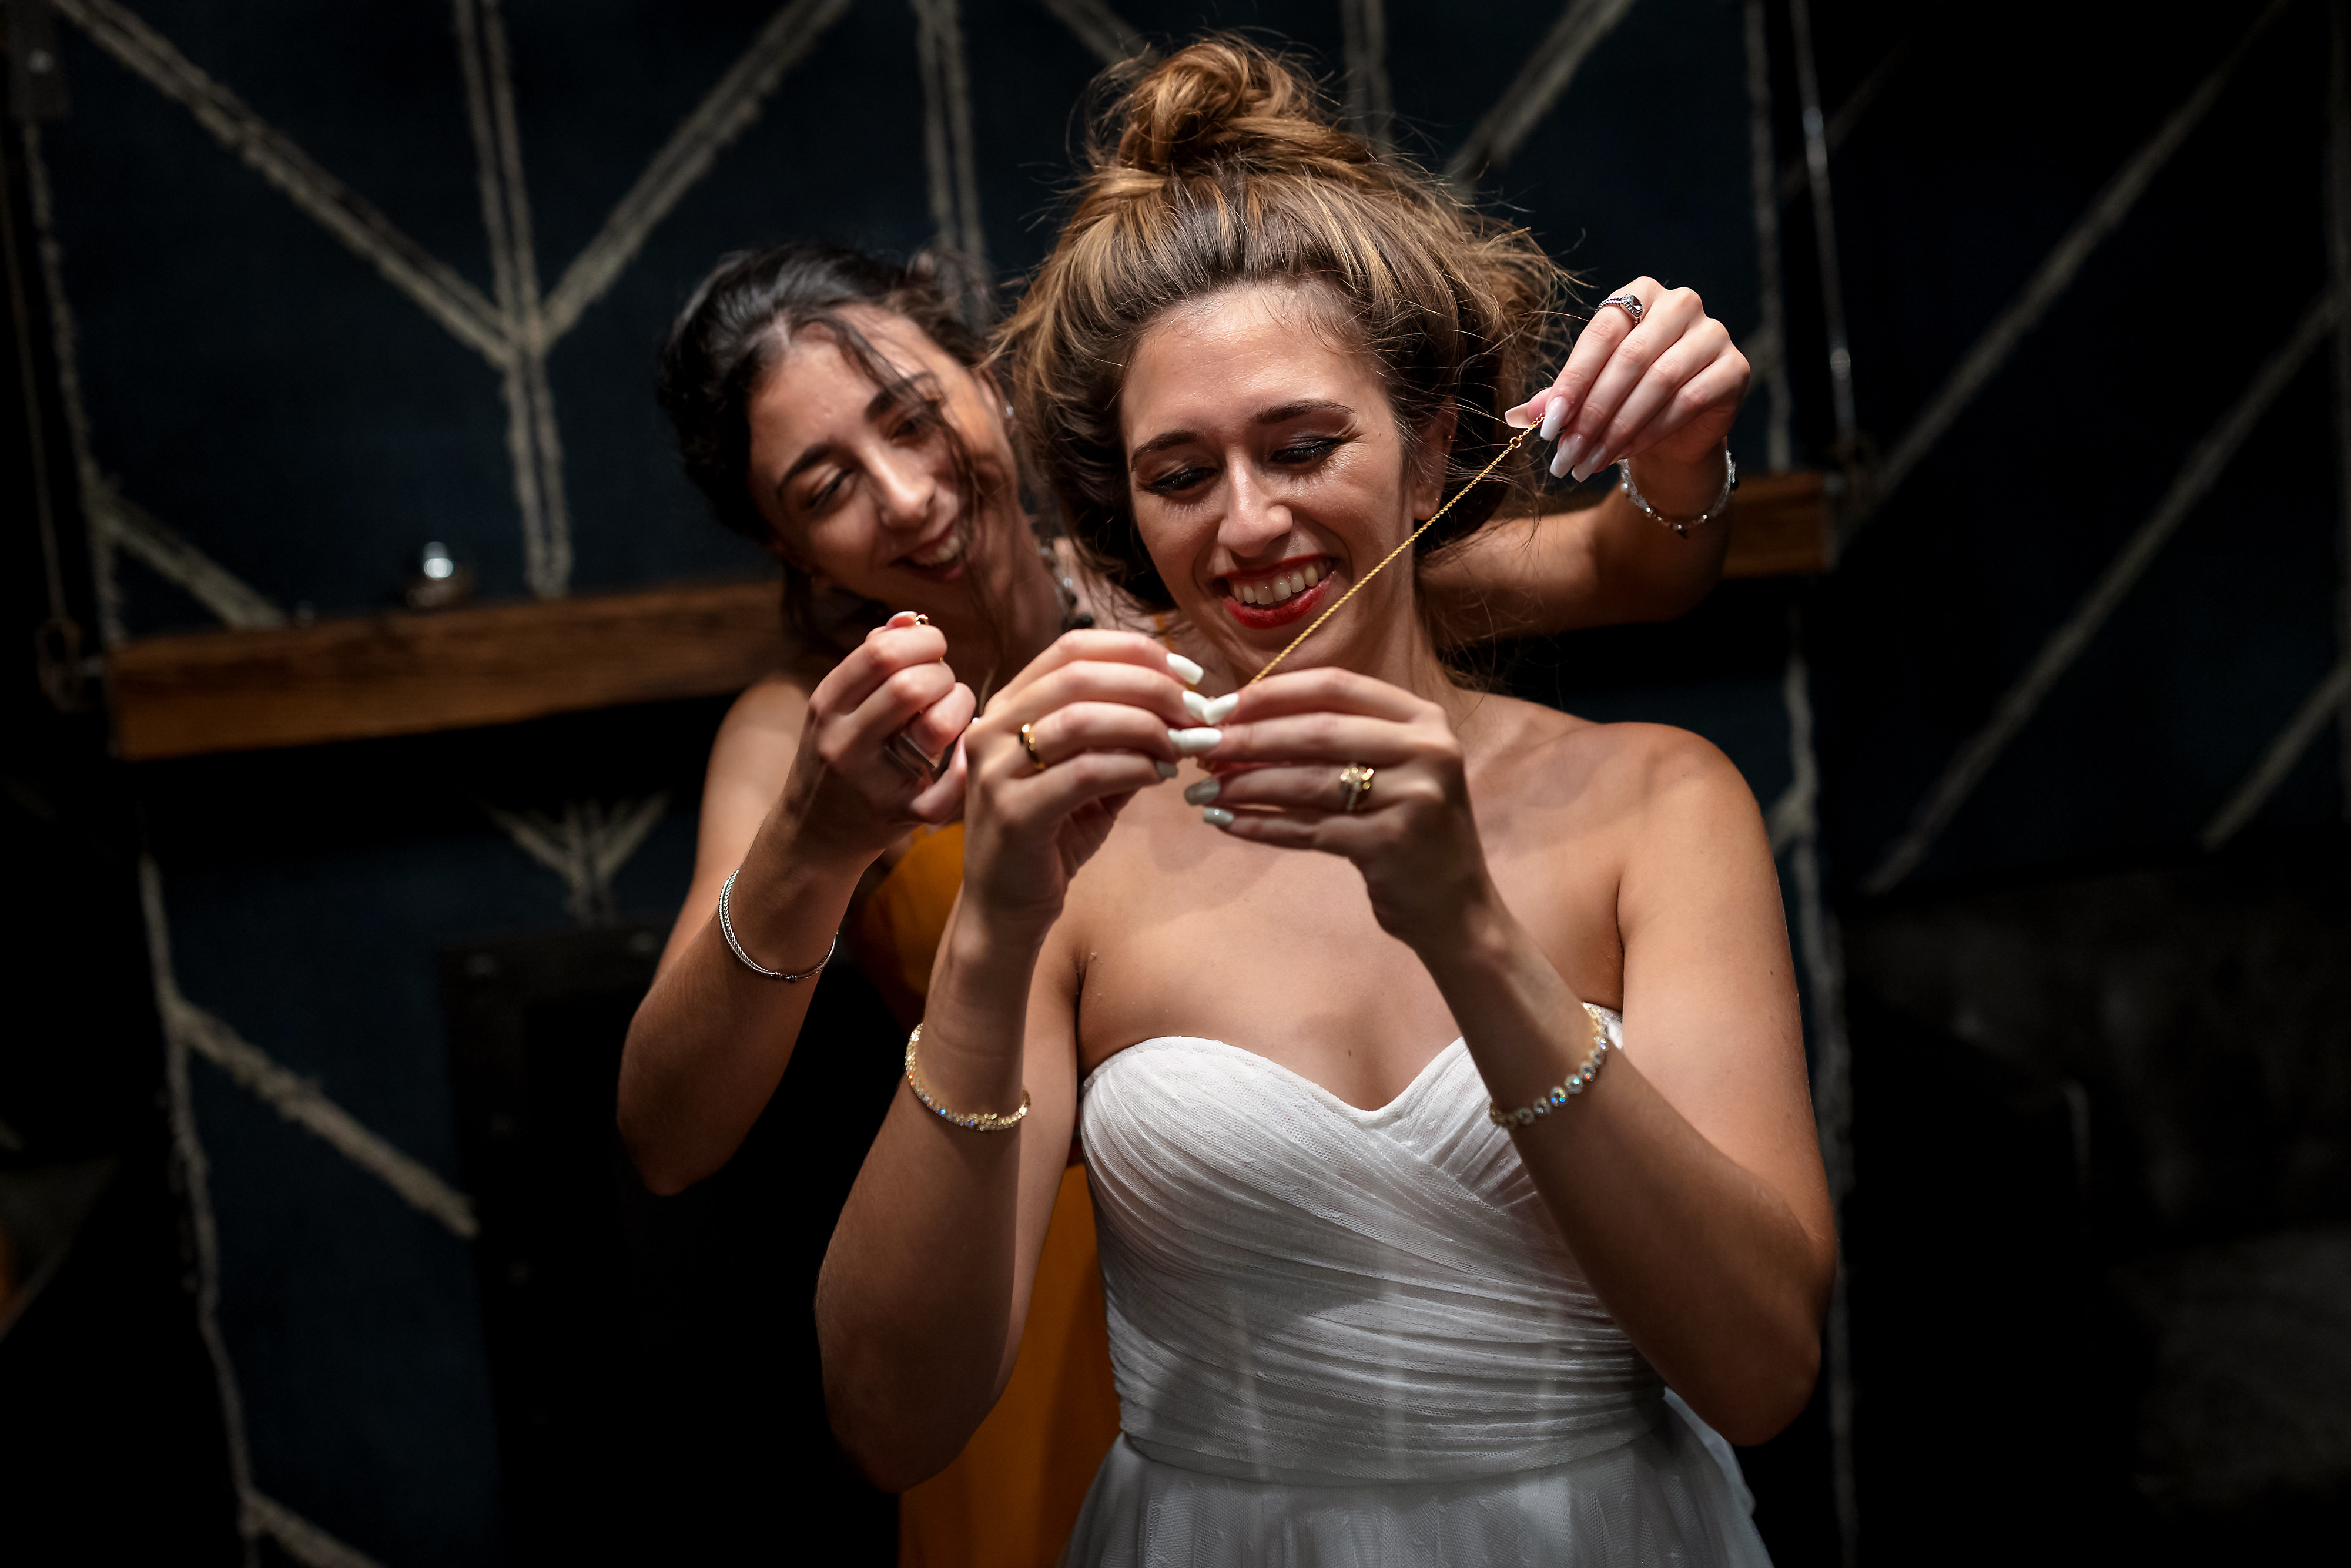 Sister helps bride put on necklace while changing outfits before first dance during wedding reception at The Dawson restaurant in downtown Chicago